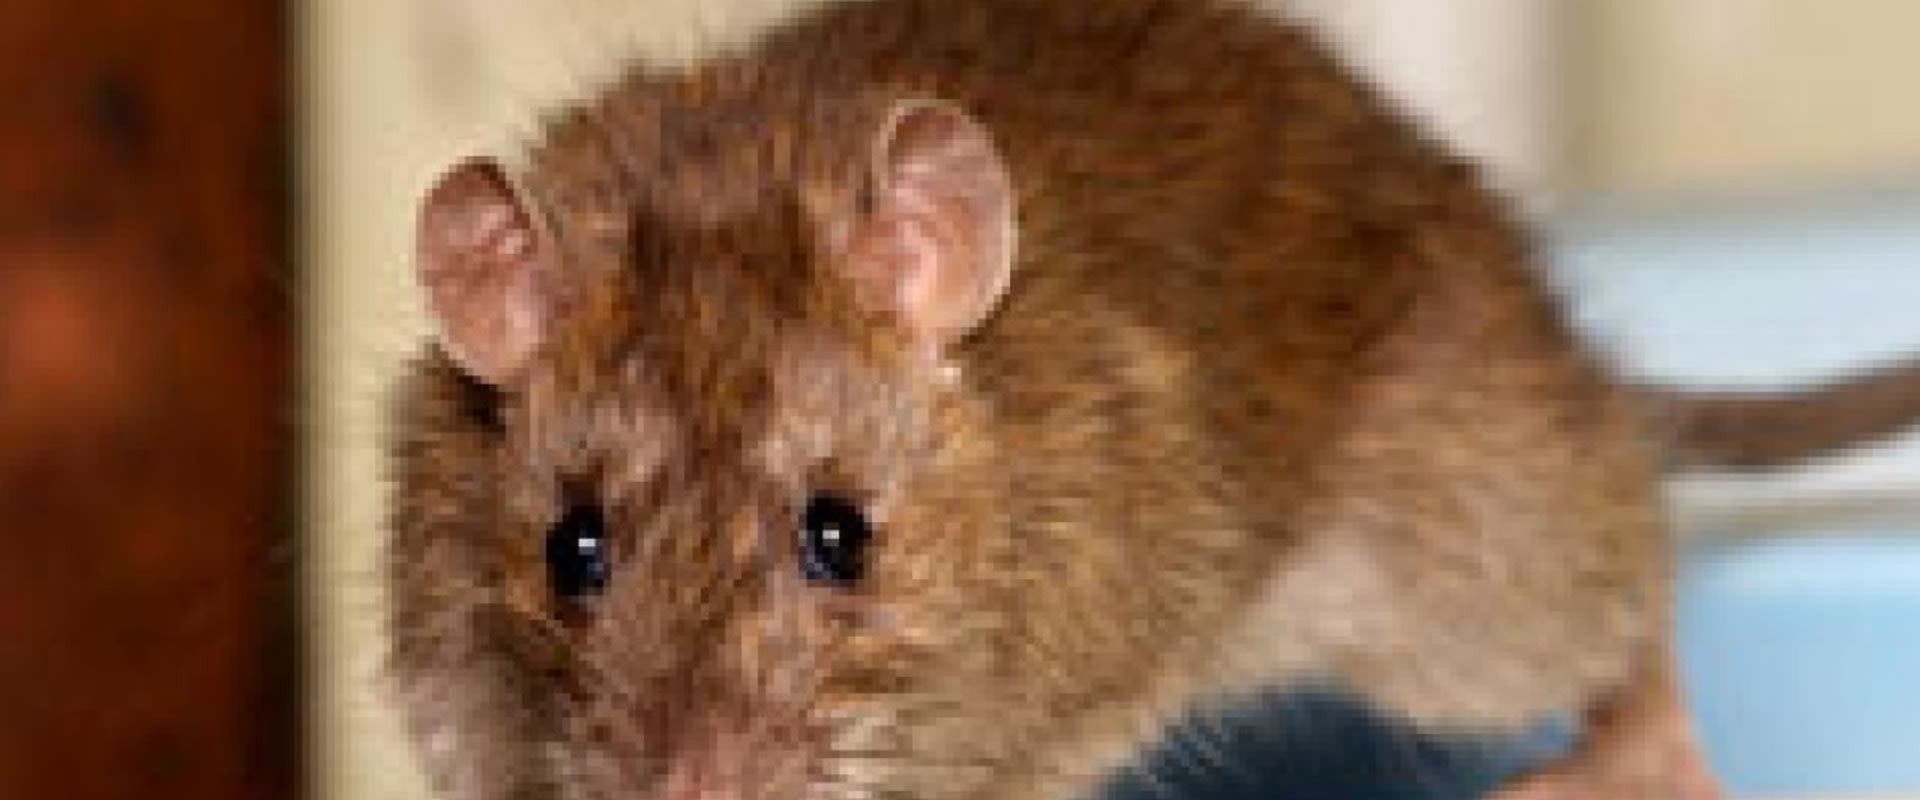 How do i control a rodent infestation?